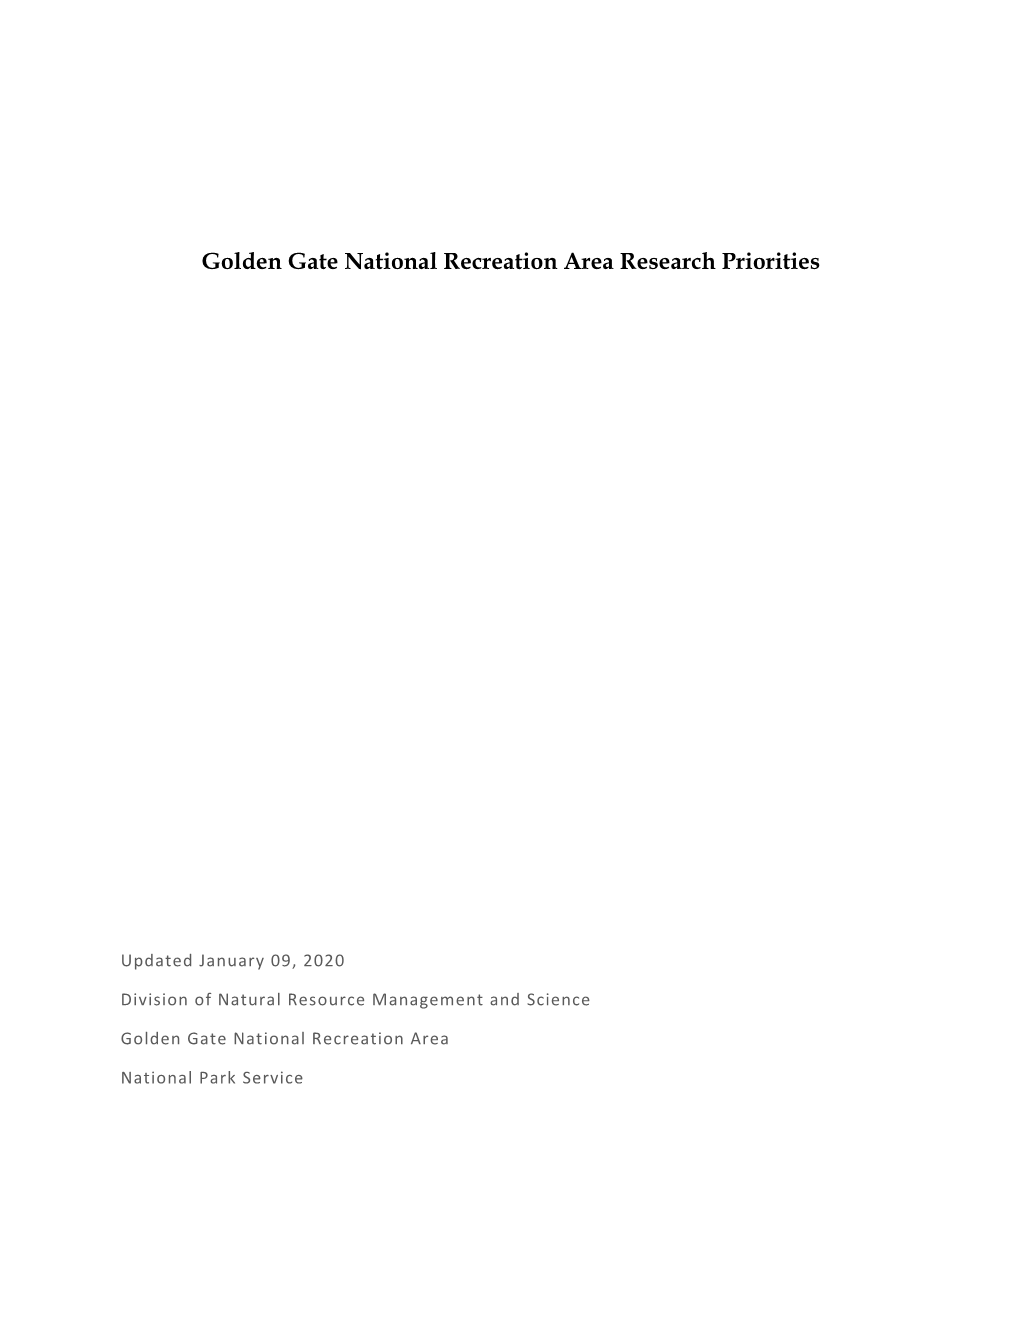 Research Priorities for Golden Gate National Recreation Area